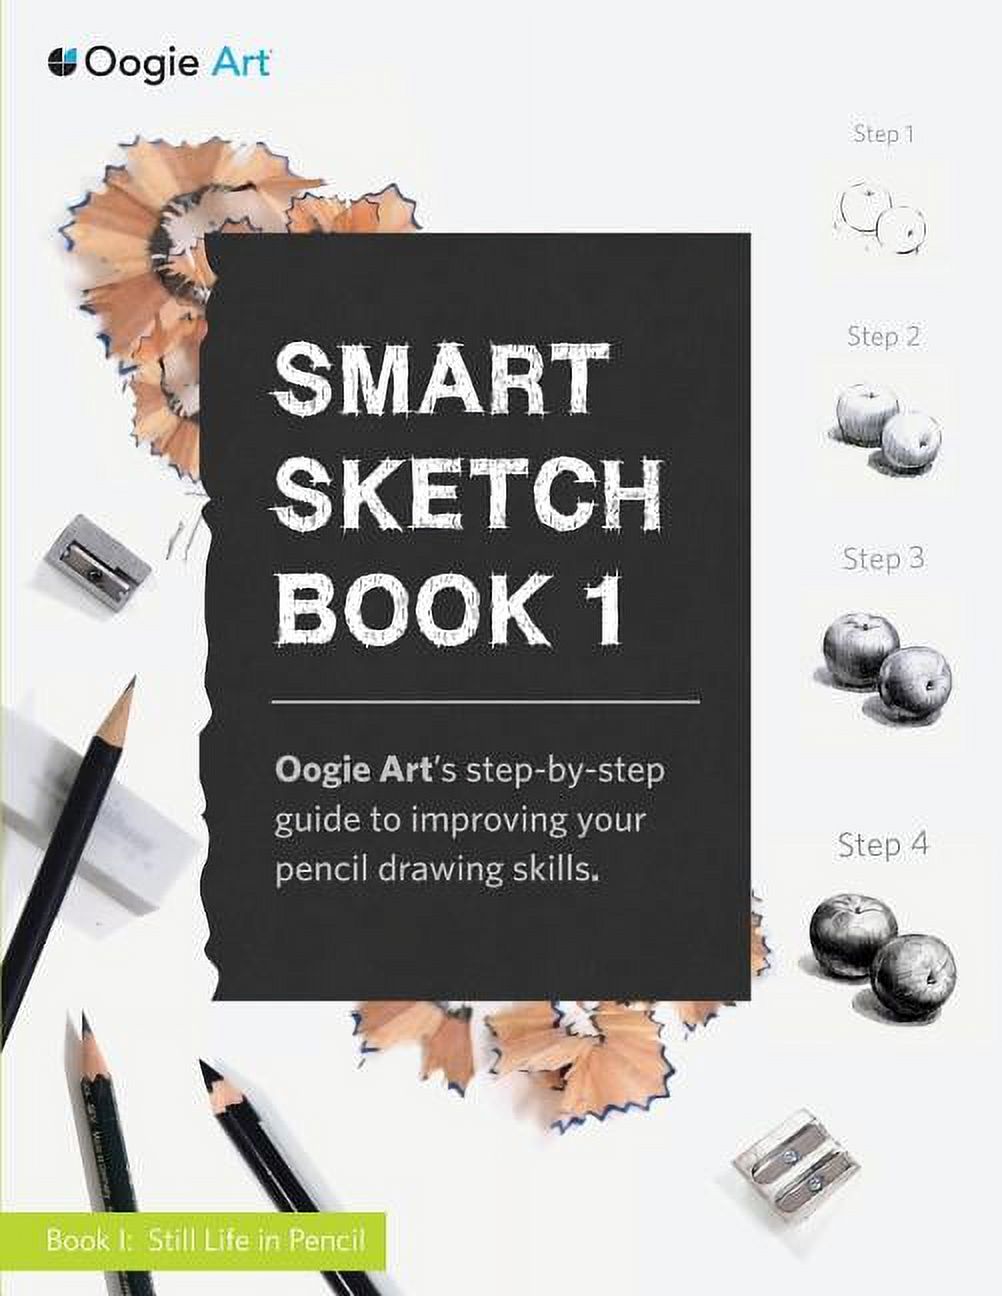 Smart Sketch Book 1: Oogie Art's Step-by-step Guide to Pencil Drawing for Beginners [Book]